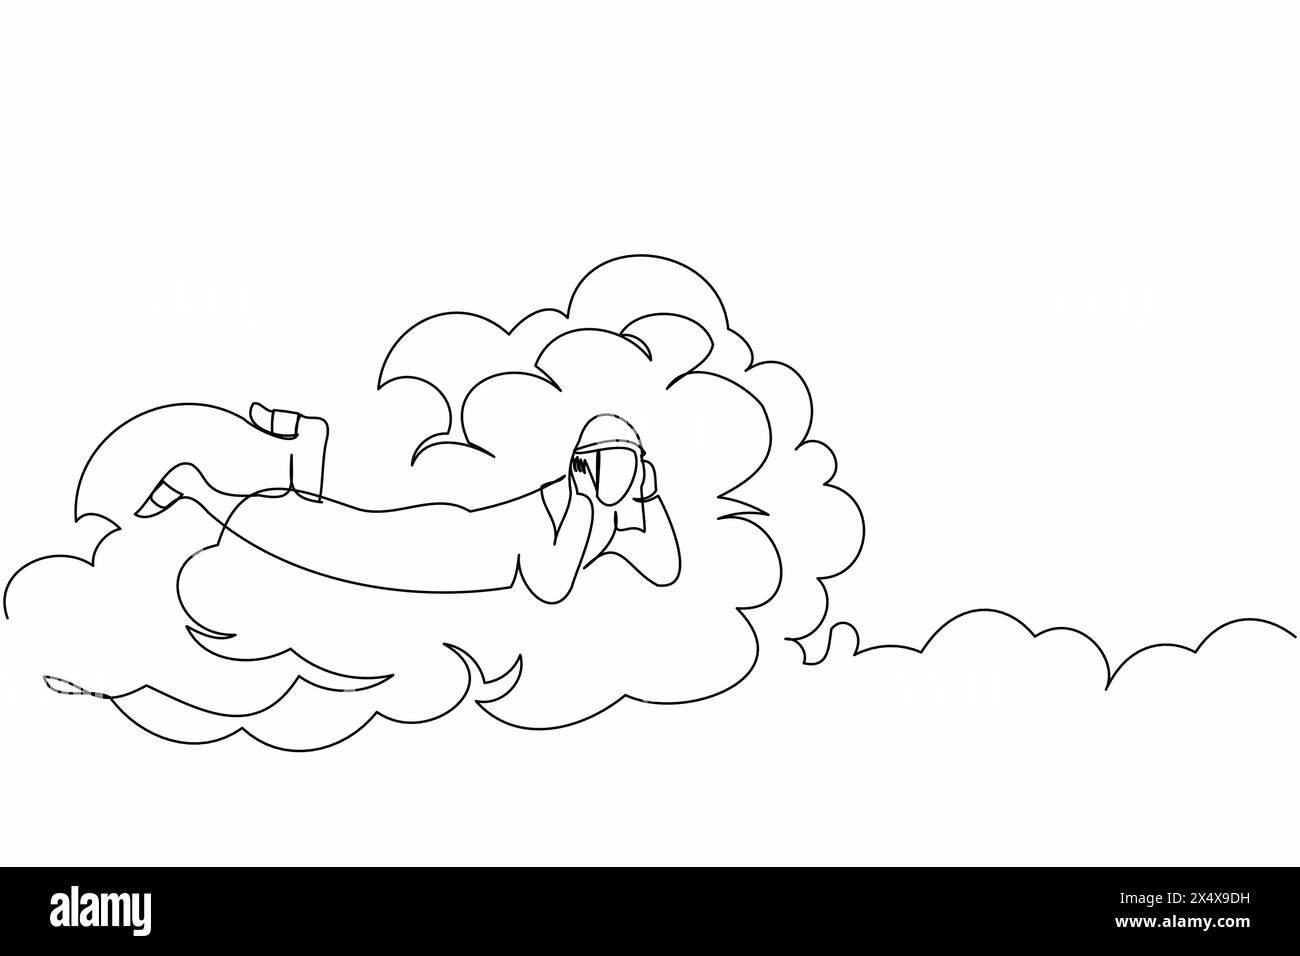 Single one line drawing Arab businessman lay on clouds and dreaming or thinking about new business project. Relaxes and resting worker concept. Contin Stock Vector